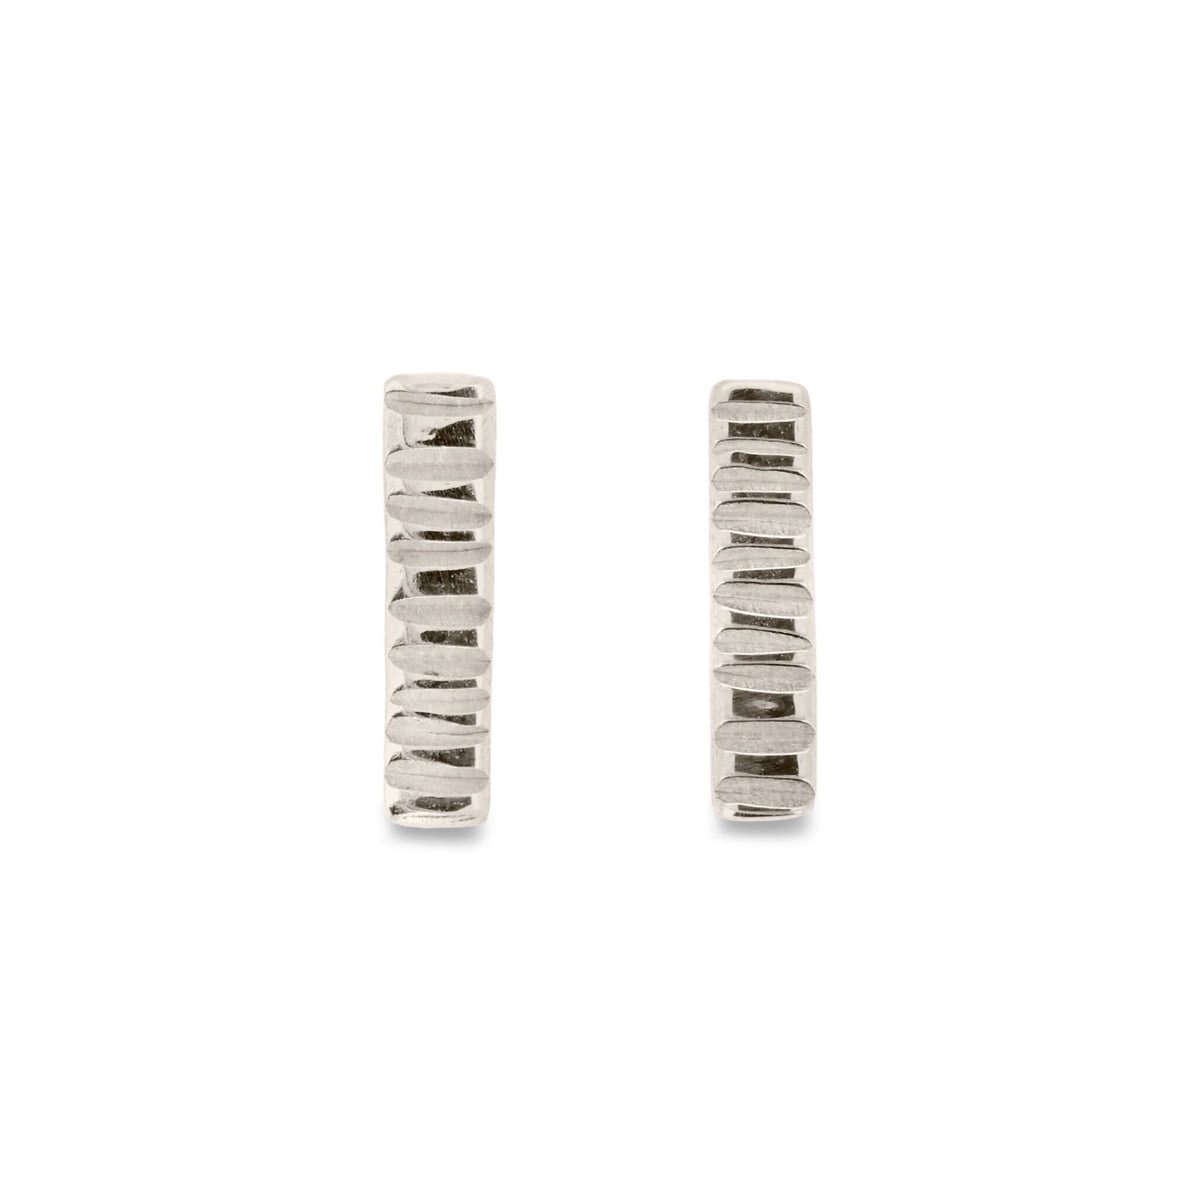 Mim Best Long line stamped studs, Silver